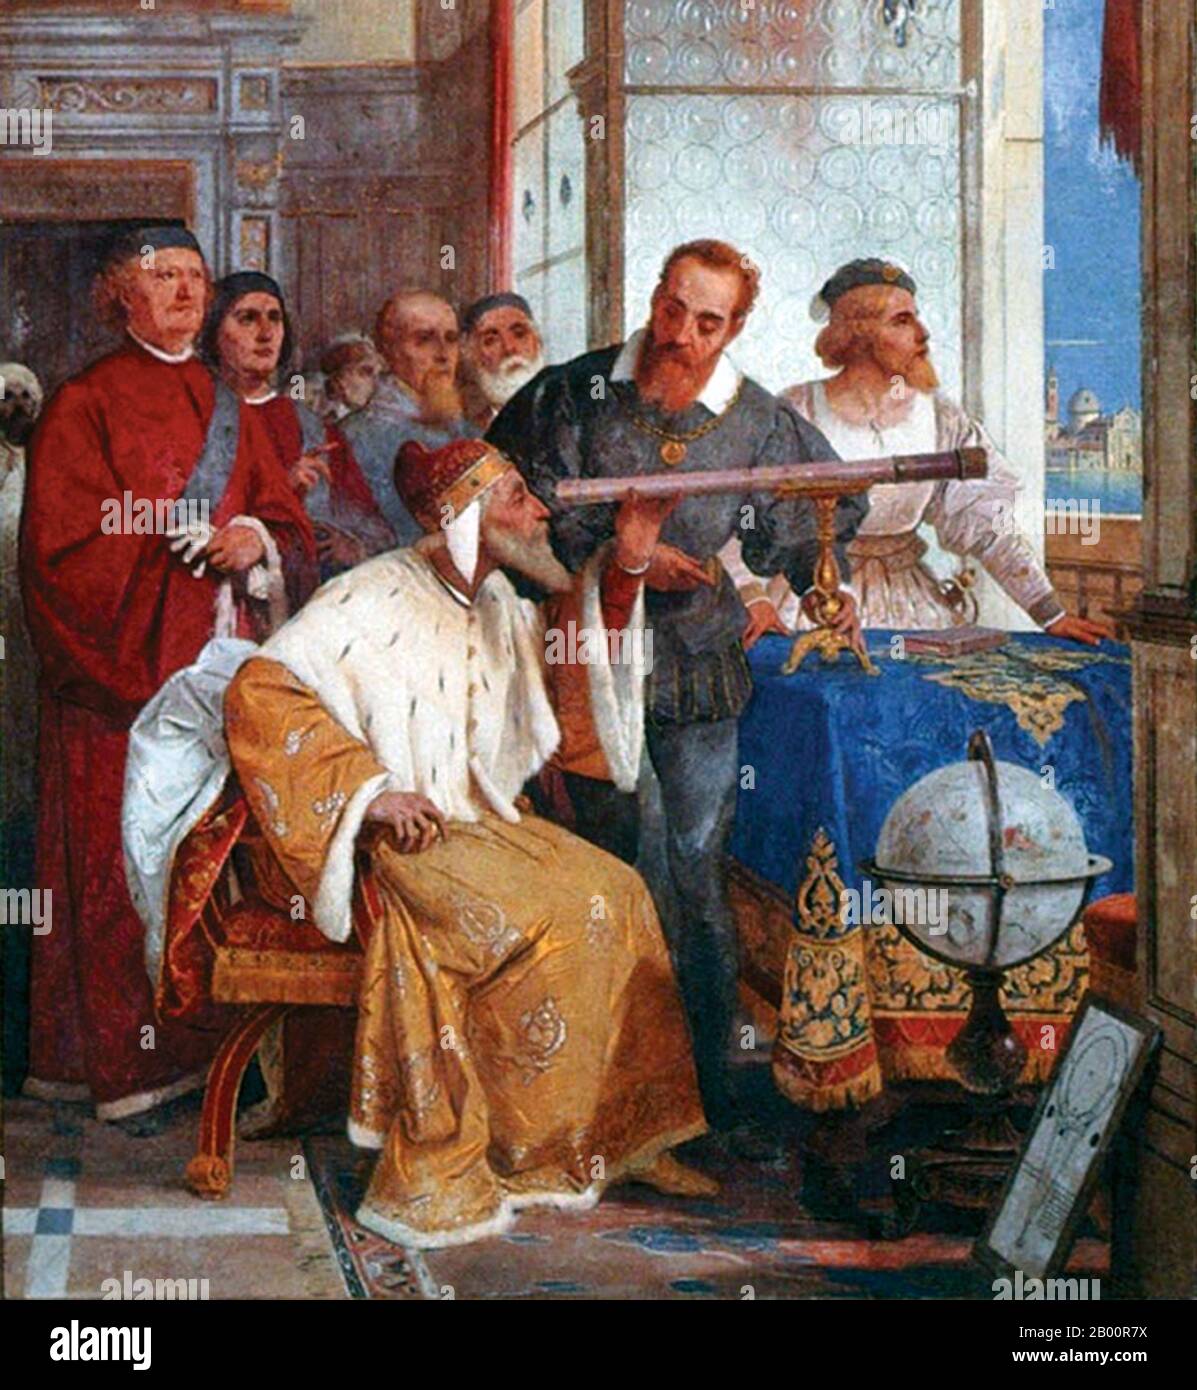 Italy: 'Galileo Galilei showing the Doge of Venice how to use the telescope'. Fresco by Giuseppe Bertini (1825-1898), 1858.  Galileo Galilei (15 Feb. 1564—8 Jan. 1642) was an Italian physicist, mathematician, philosopher and astronomer who played a pivotal role in establishing modern science at a time when contradiction of religion was considered heresy.  It was as an astronomer that he was most controversial. Galileo developed telescopes that confirmed the phases of Venus, and the discovery of the four largest satellites of Jupiter (named the Galilean moons in his honour), as well as sunspots Stock Photo